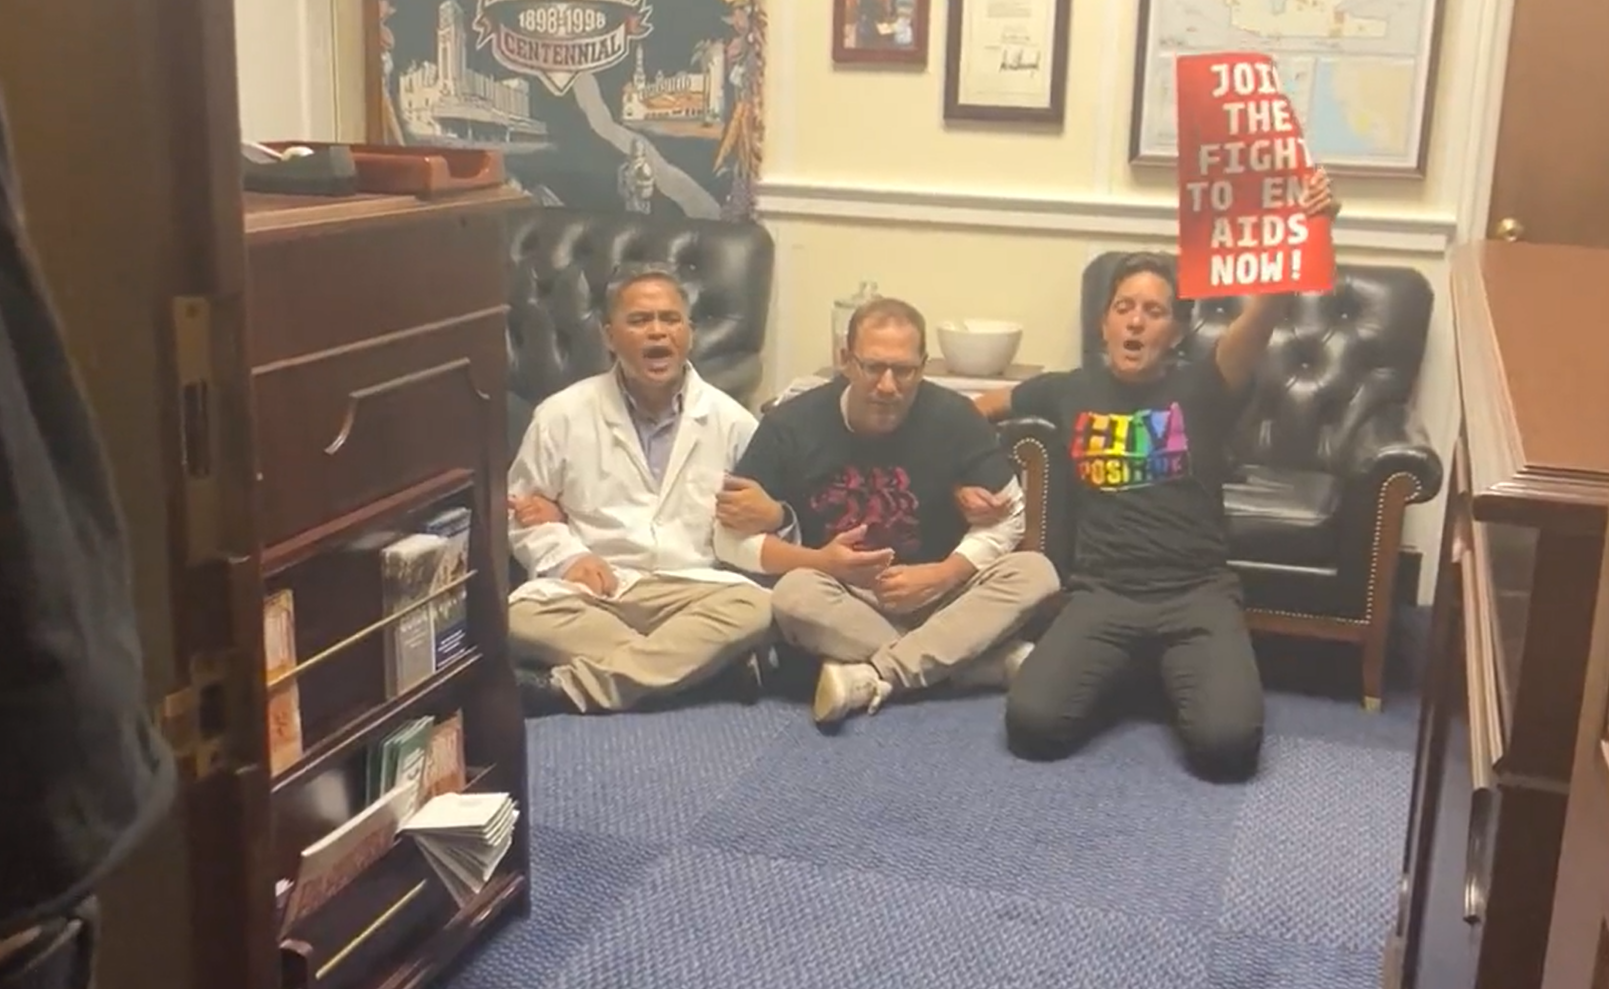 WATCH: Protestors Arrested After Occupying Kevin McCarthy’s Office